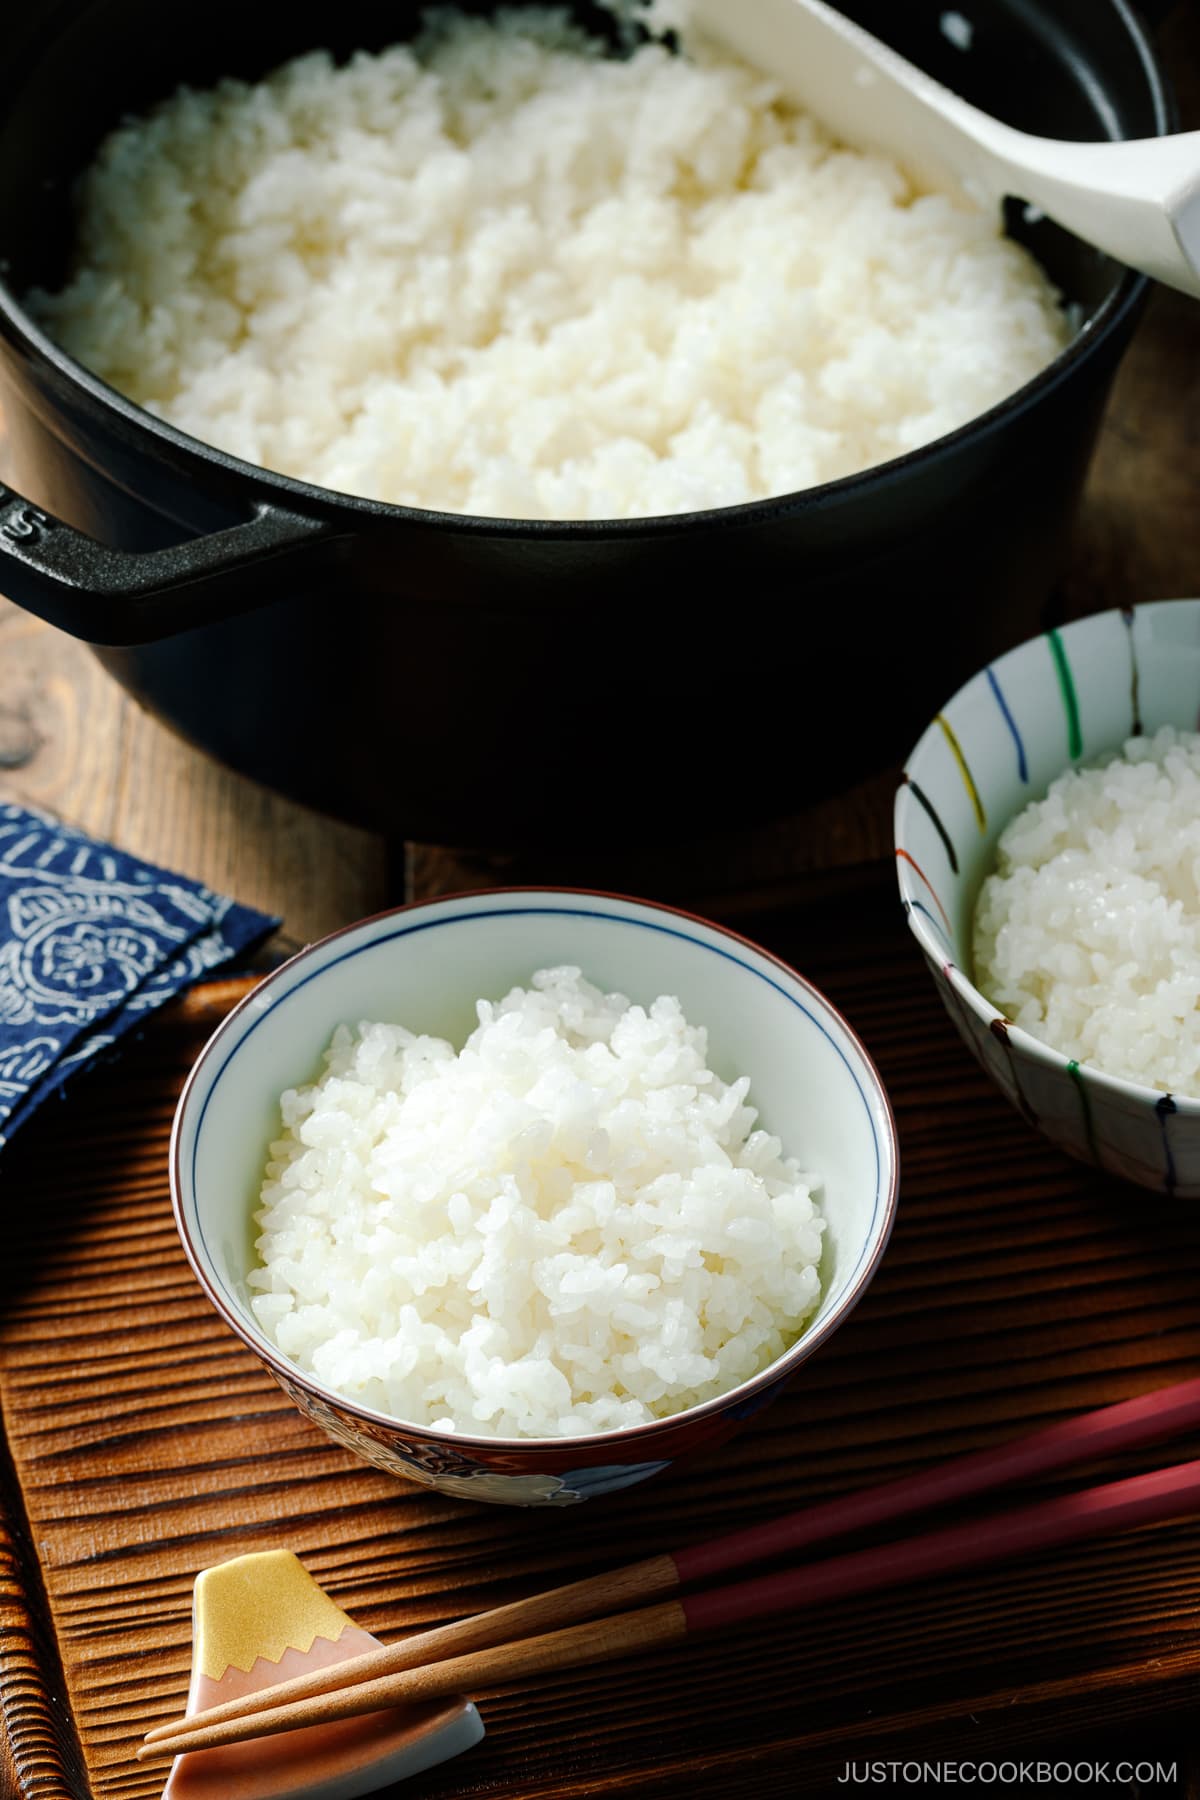 A black Staub and Japanese rice bowls containing perfectly cooked Japanese short-grain rice.